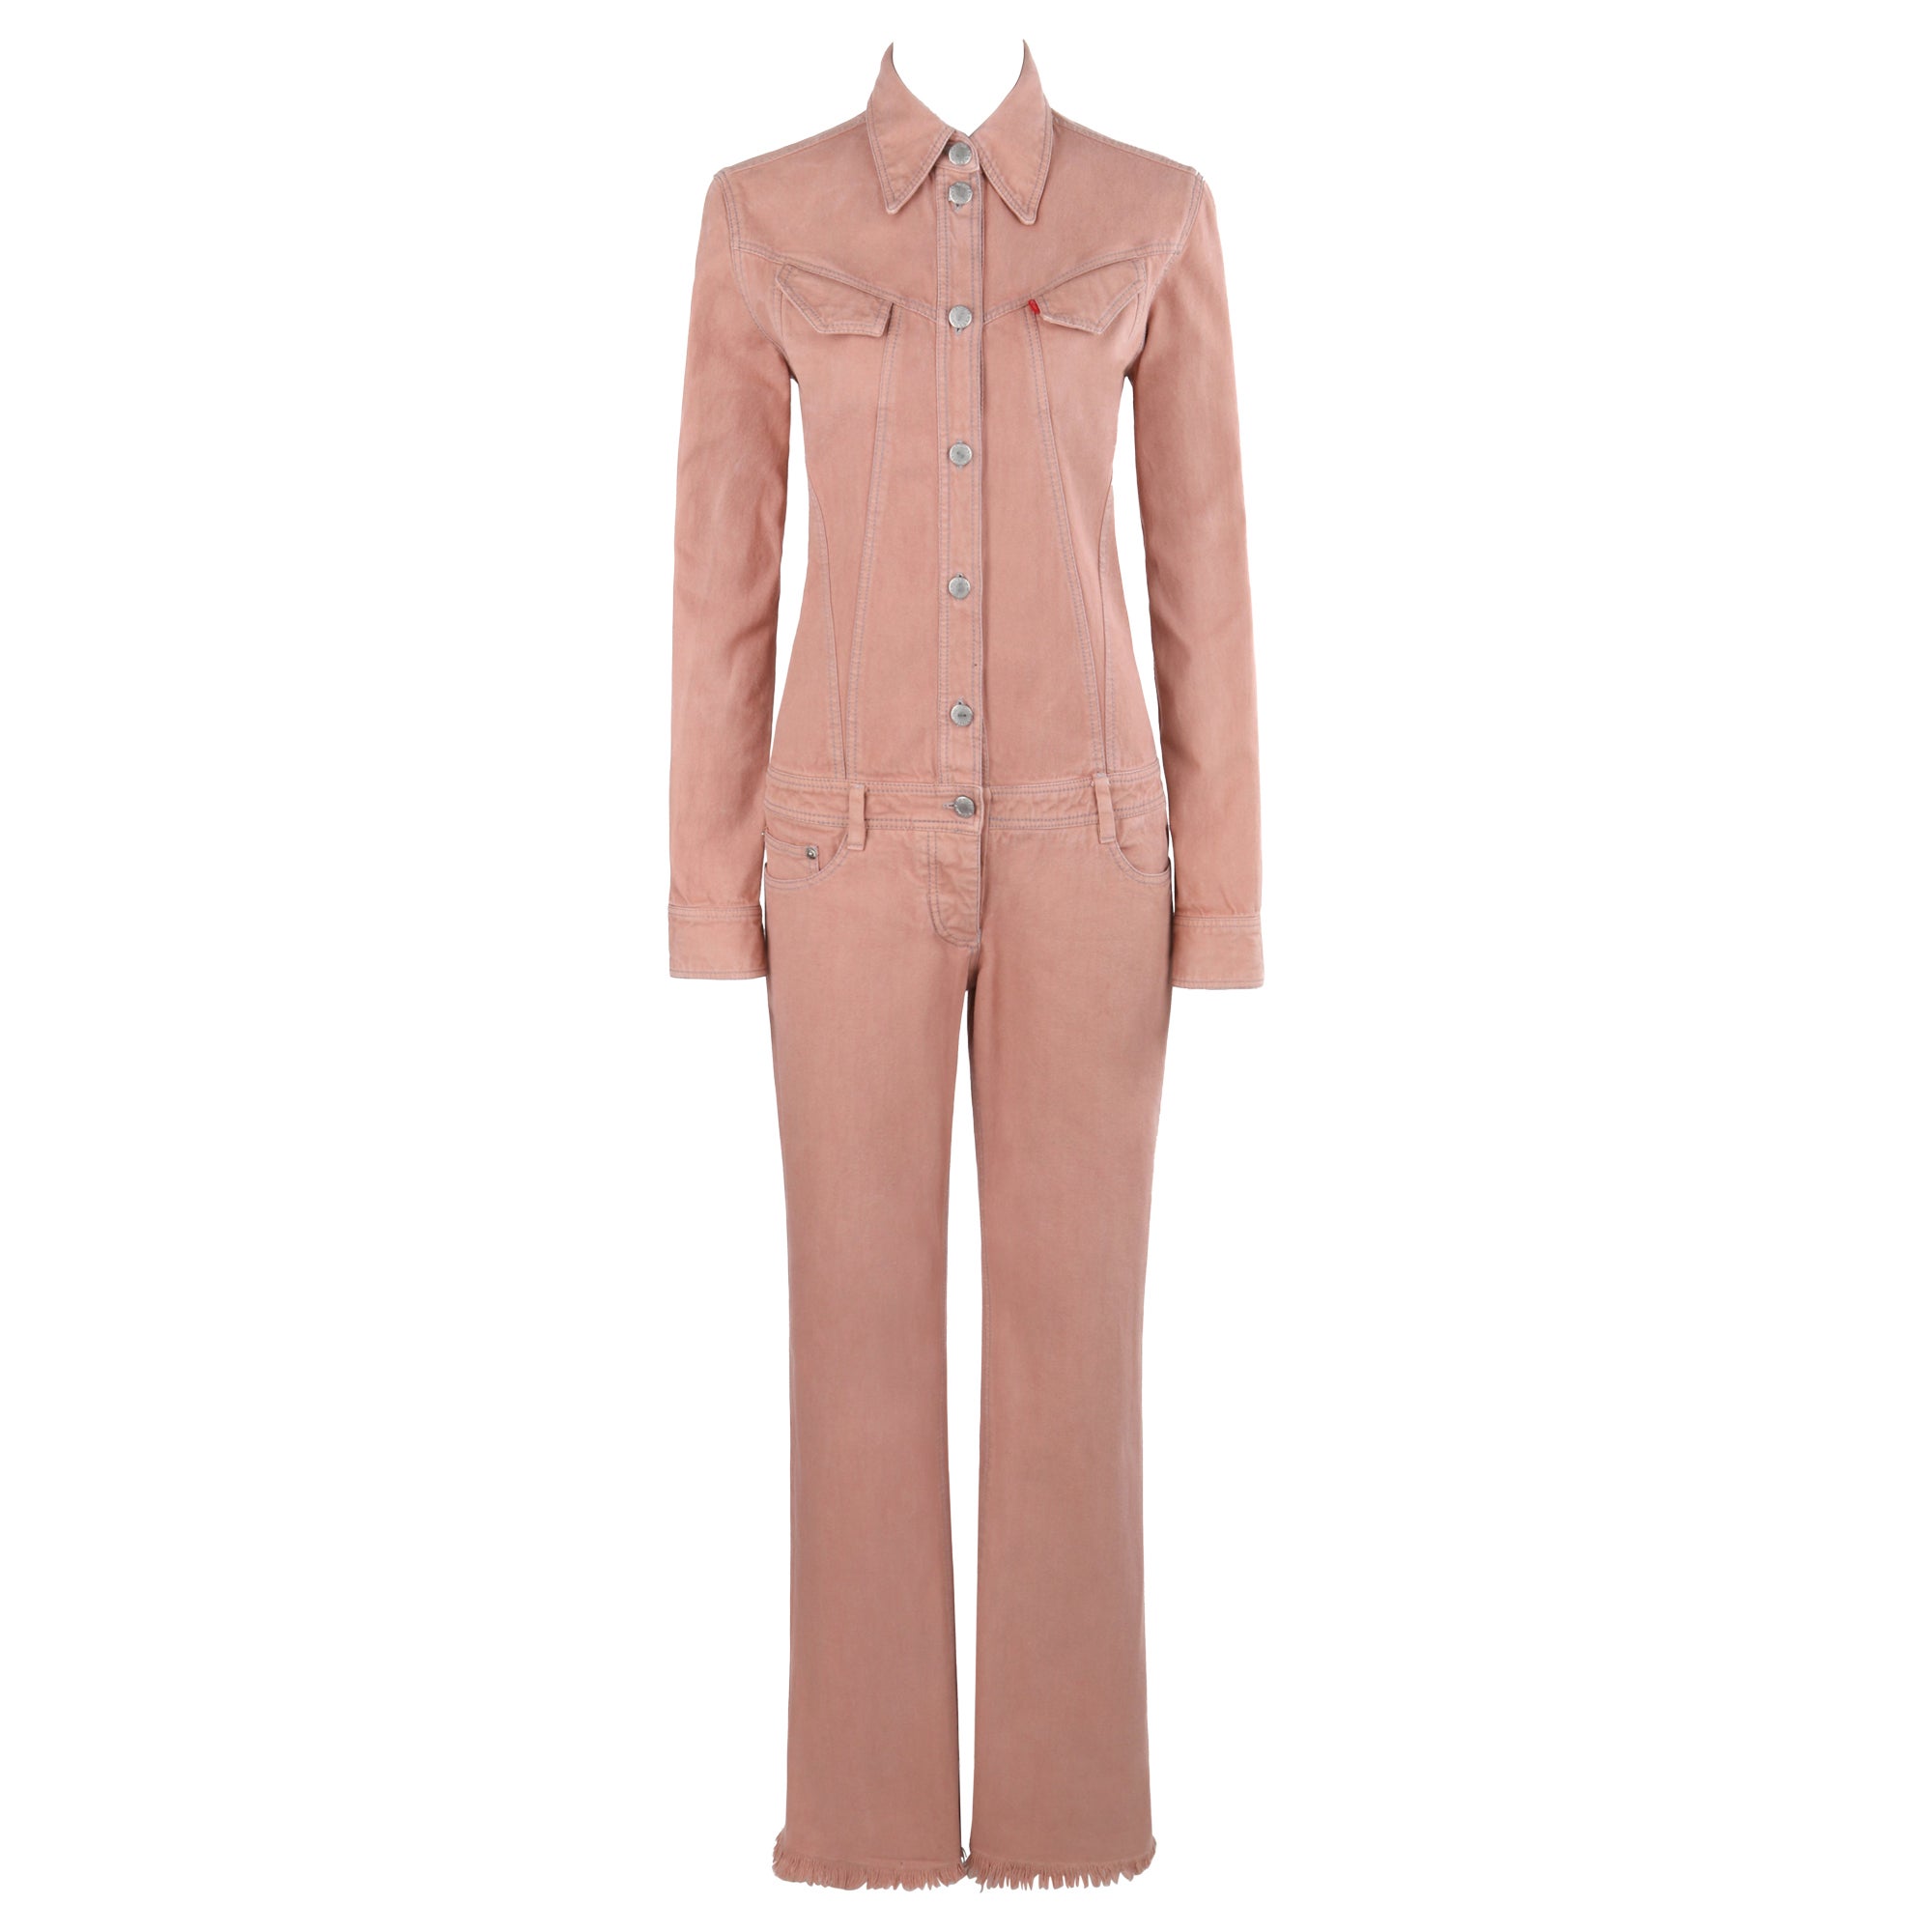 ALEXANDER McQUEEN A/W 1999 "The Overlook" Pink Denim Low Rise Bumster Jumpsuit For Sale